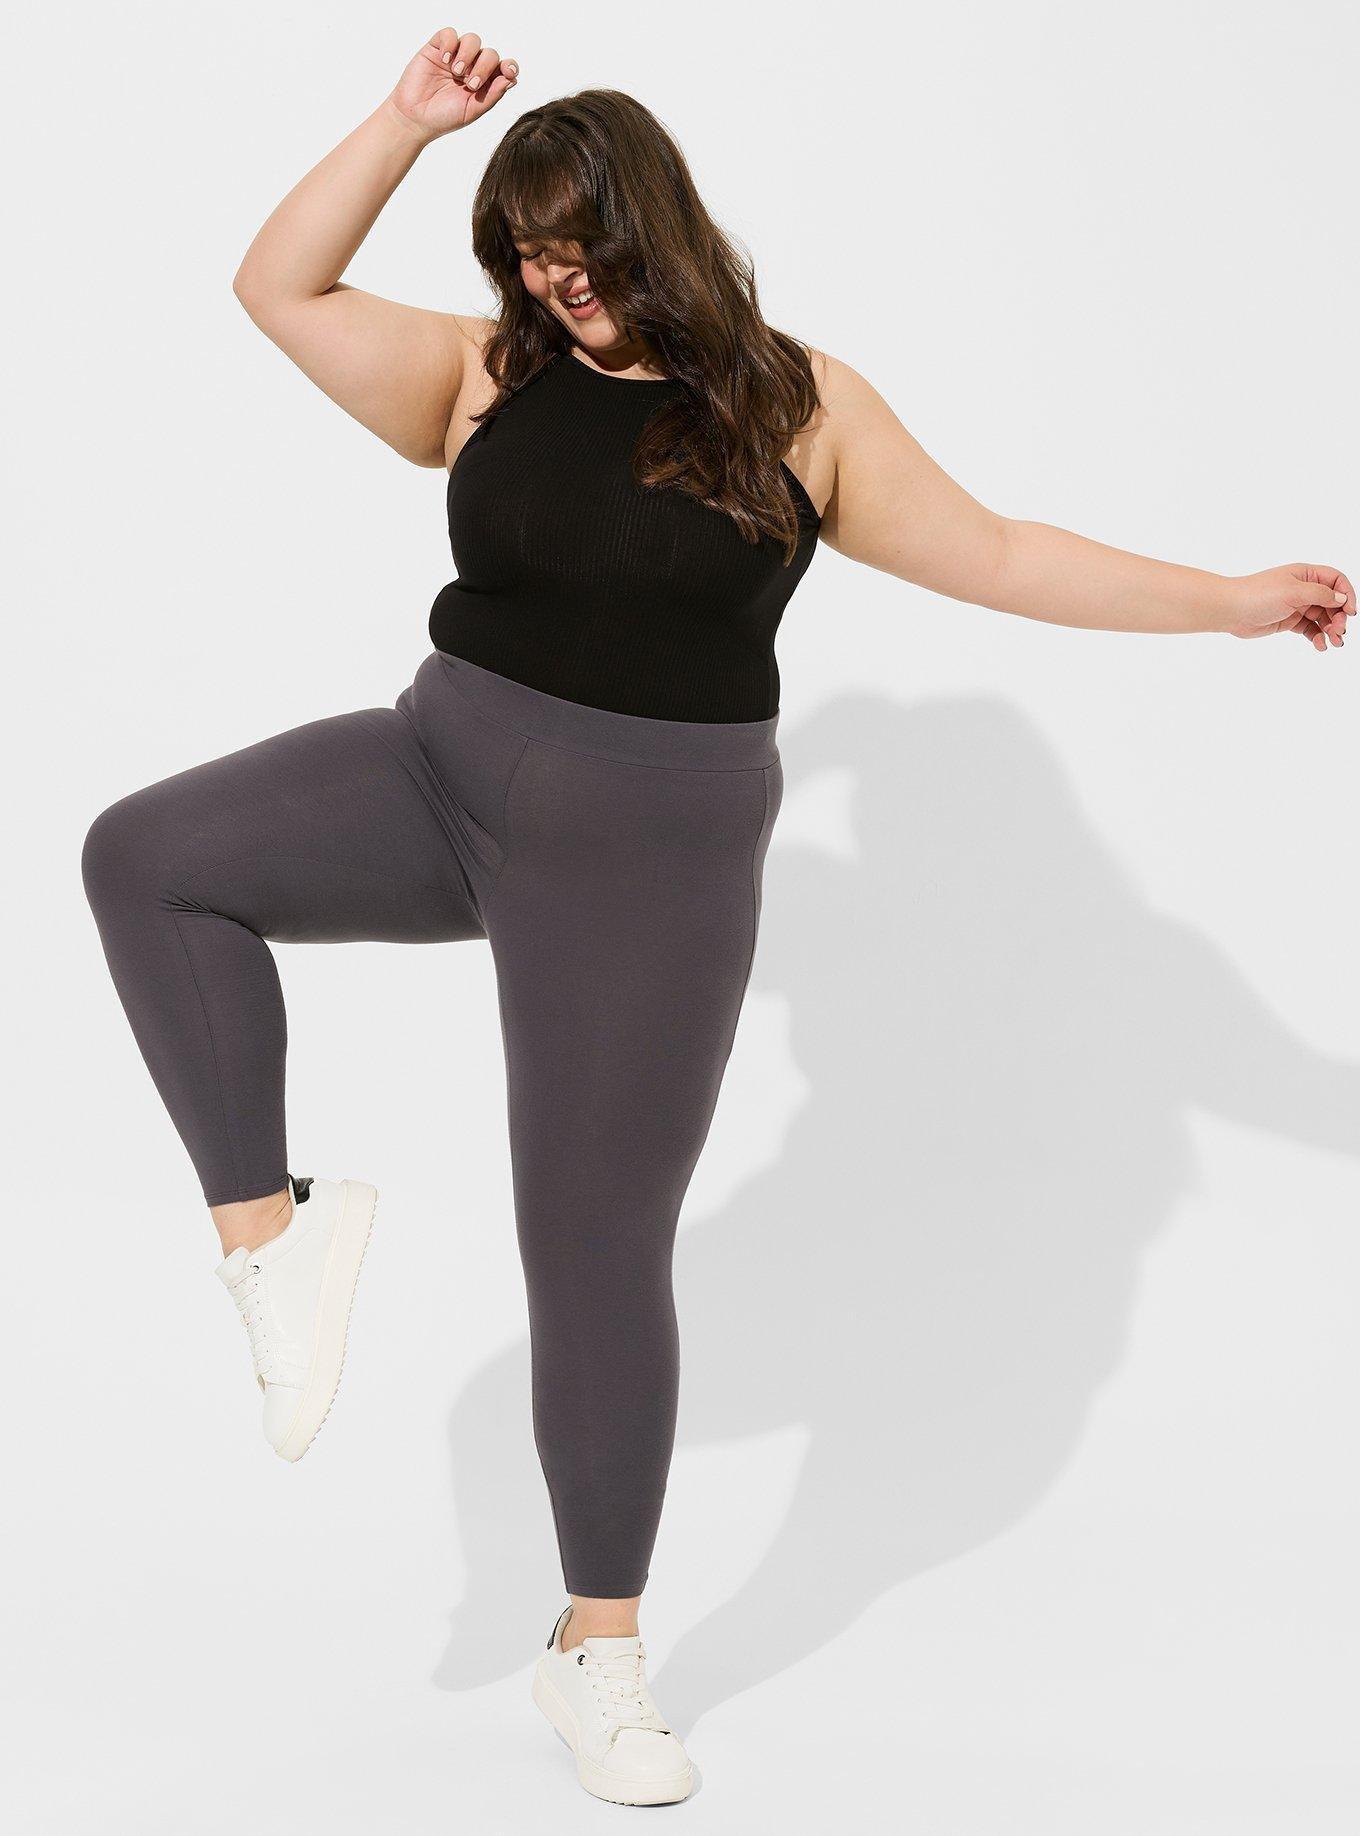 These $18 Boot-Cut Yoga Pants Have Over 12,000 5-Star  Reviews